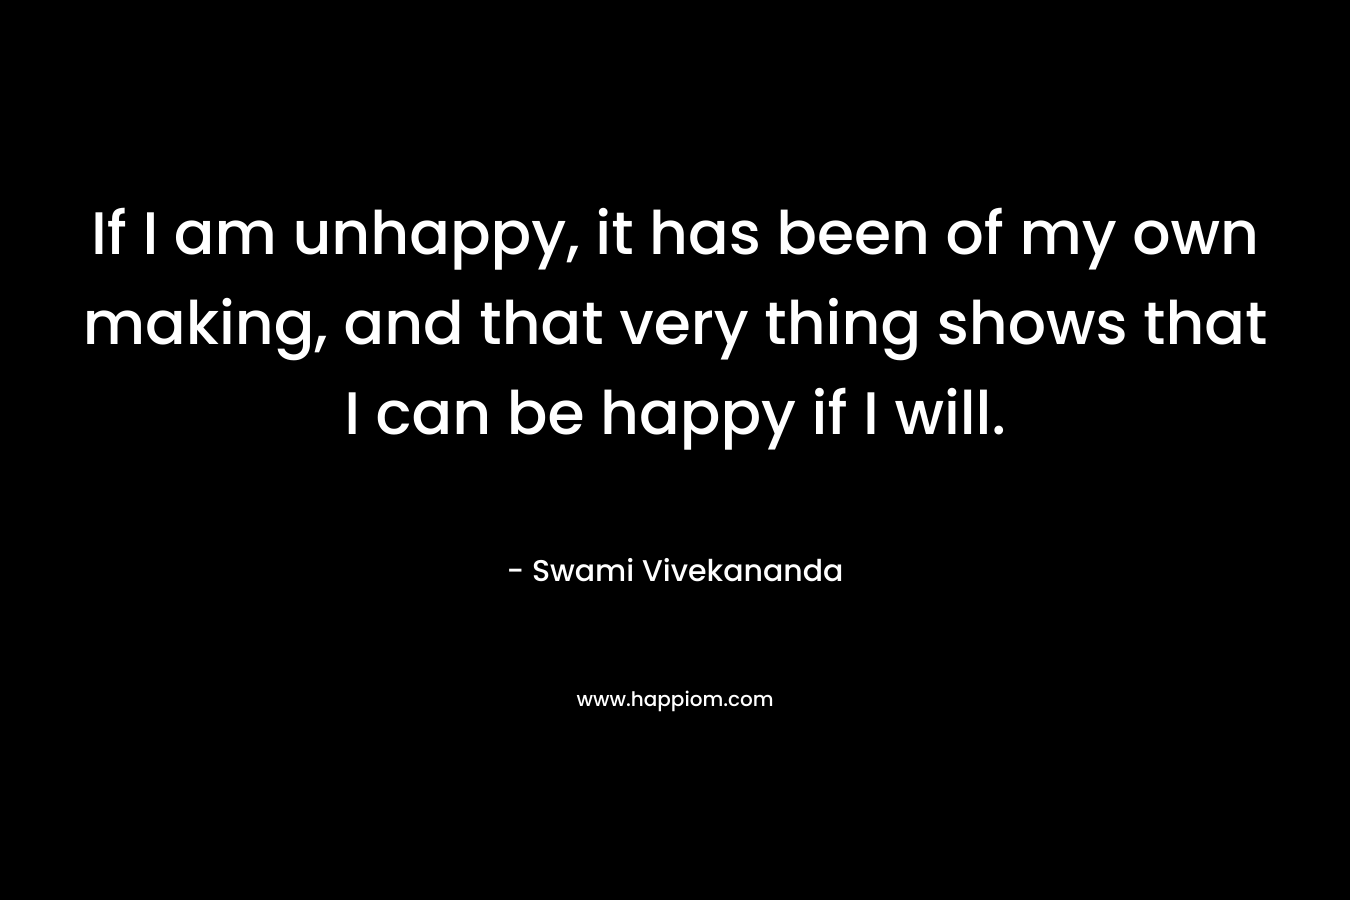 If I am unhappy, it has been of my own making, and that very thing shows that I can be happy if I will.